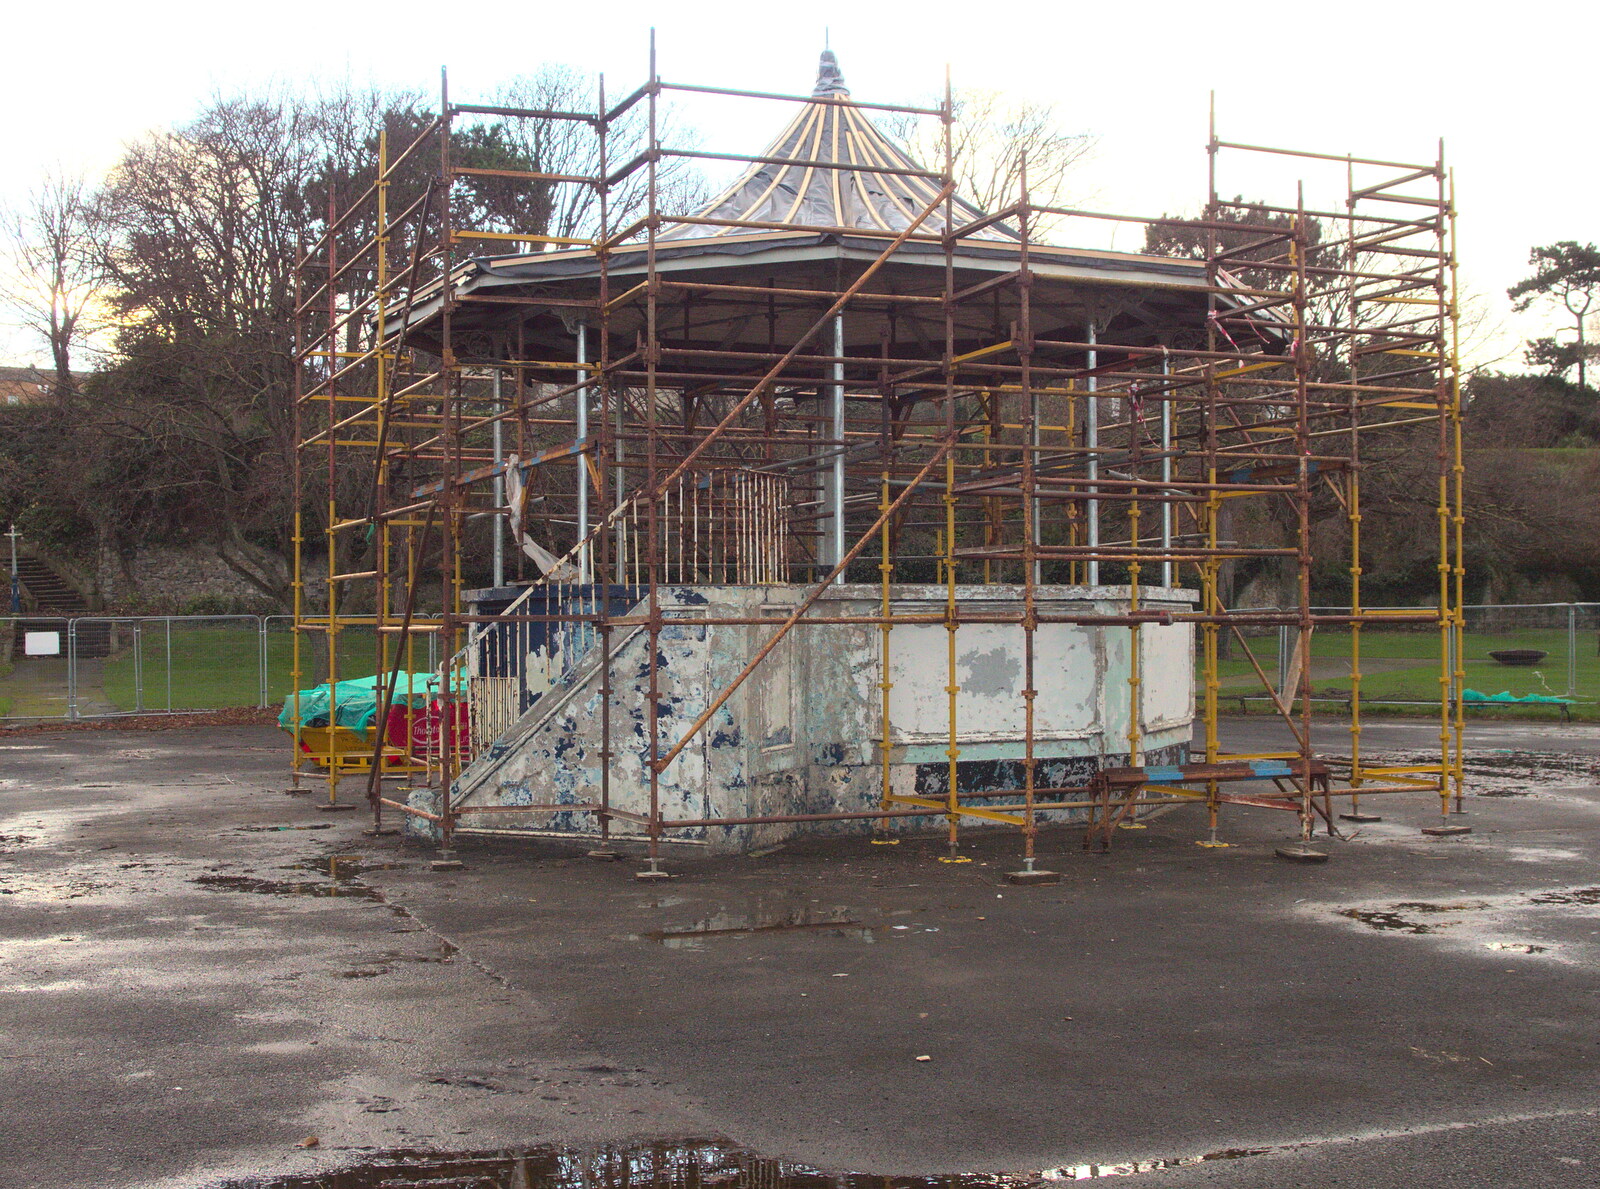 The under-restoration bandstand in the park from Christmas Eve in Dublin and Blackrock, Ireland - 24th December 2015